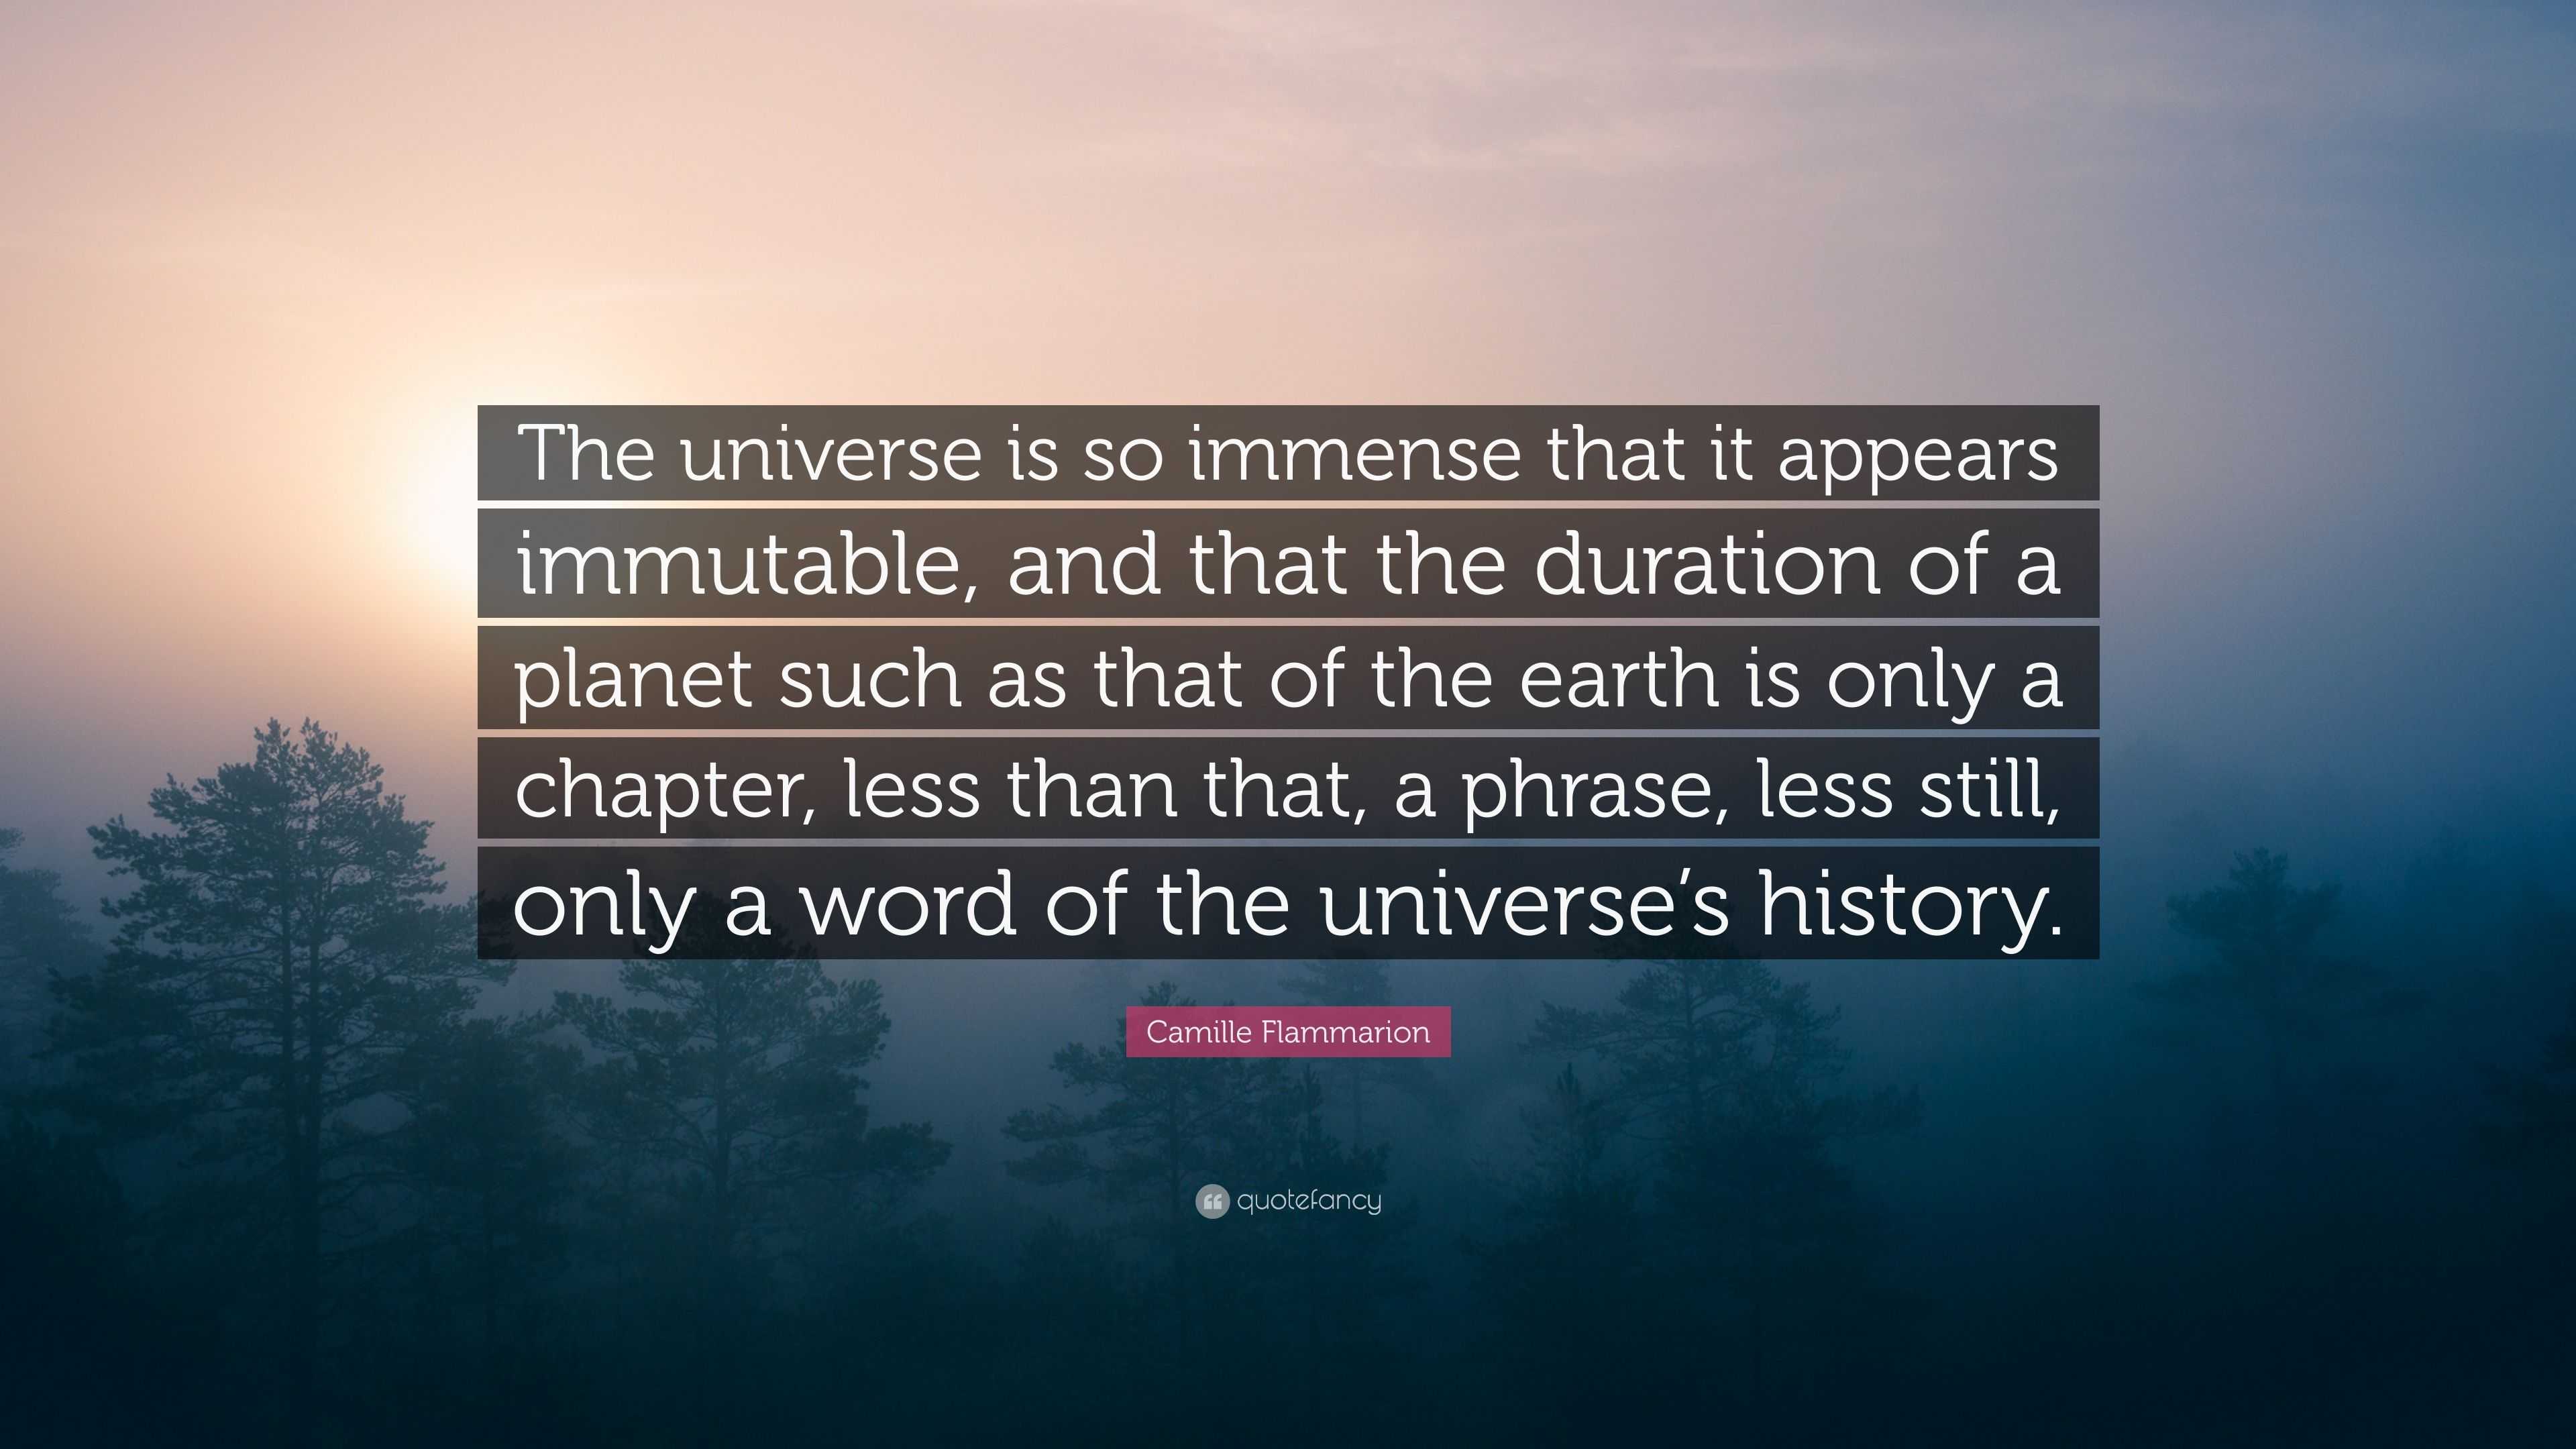 Camille Flammarion Quote: “The universe is so immense that it appears ...